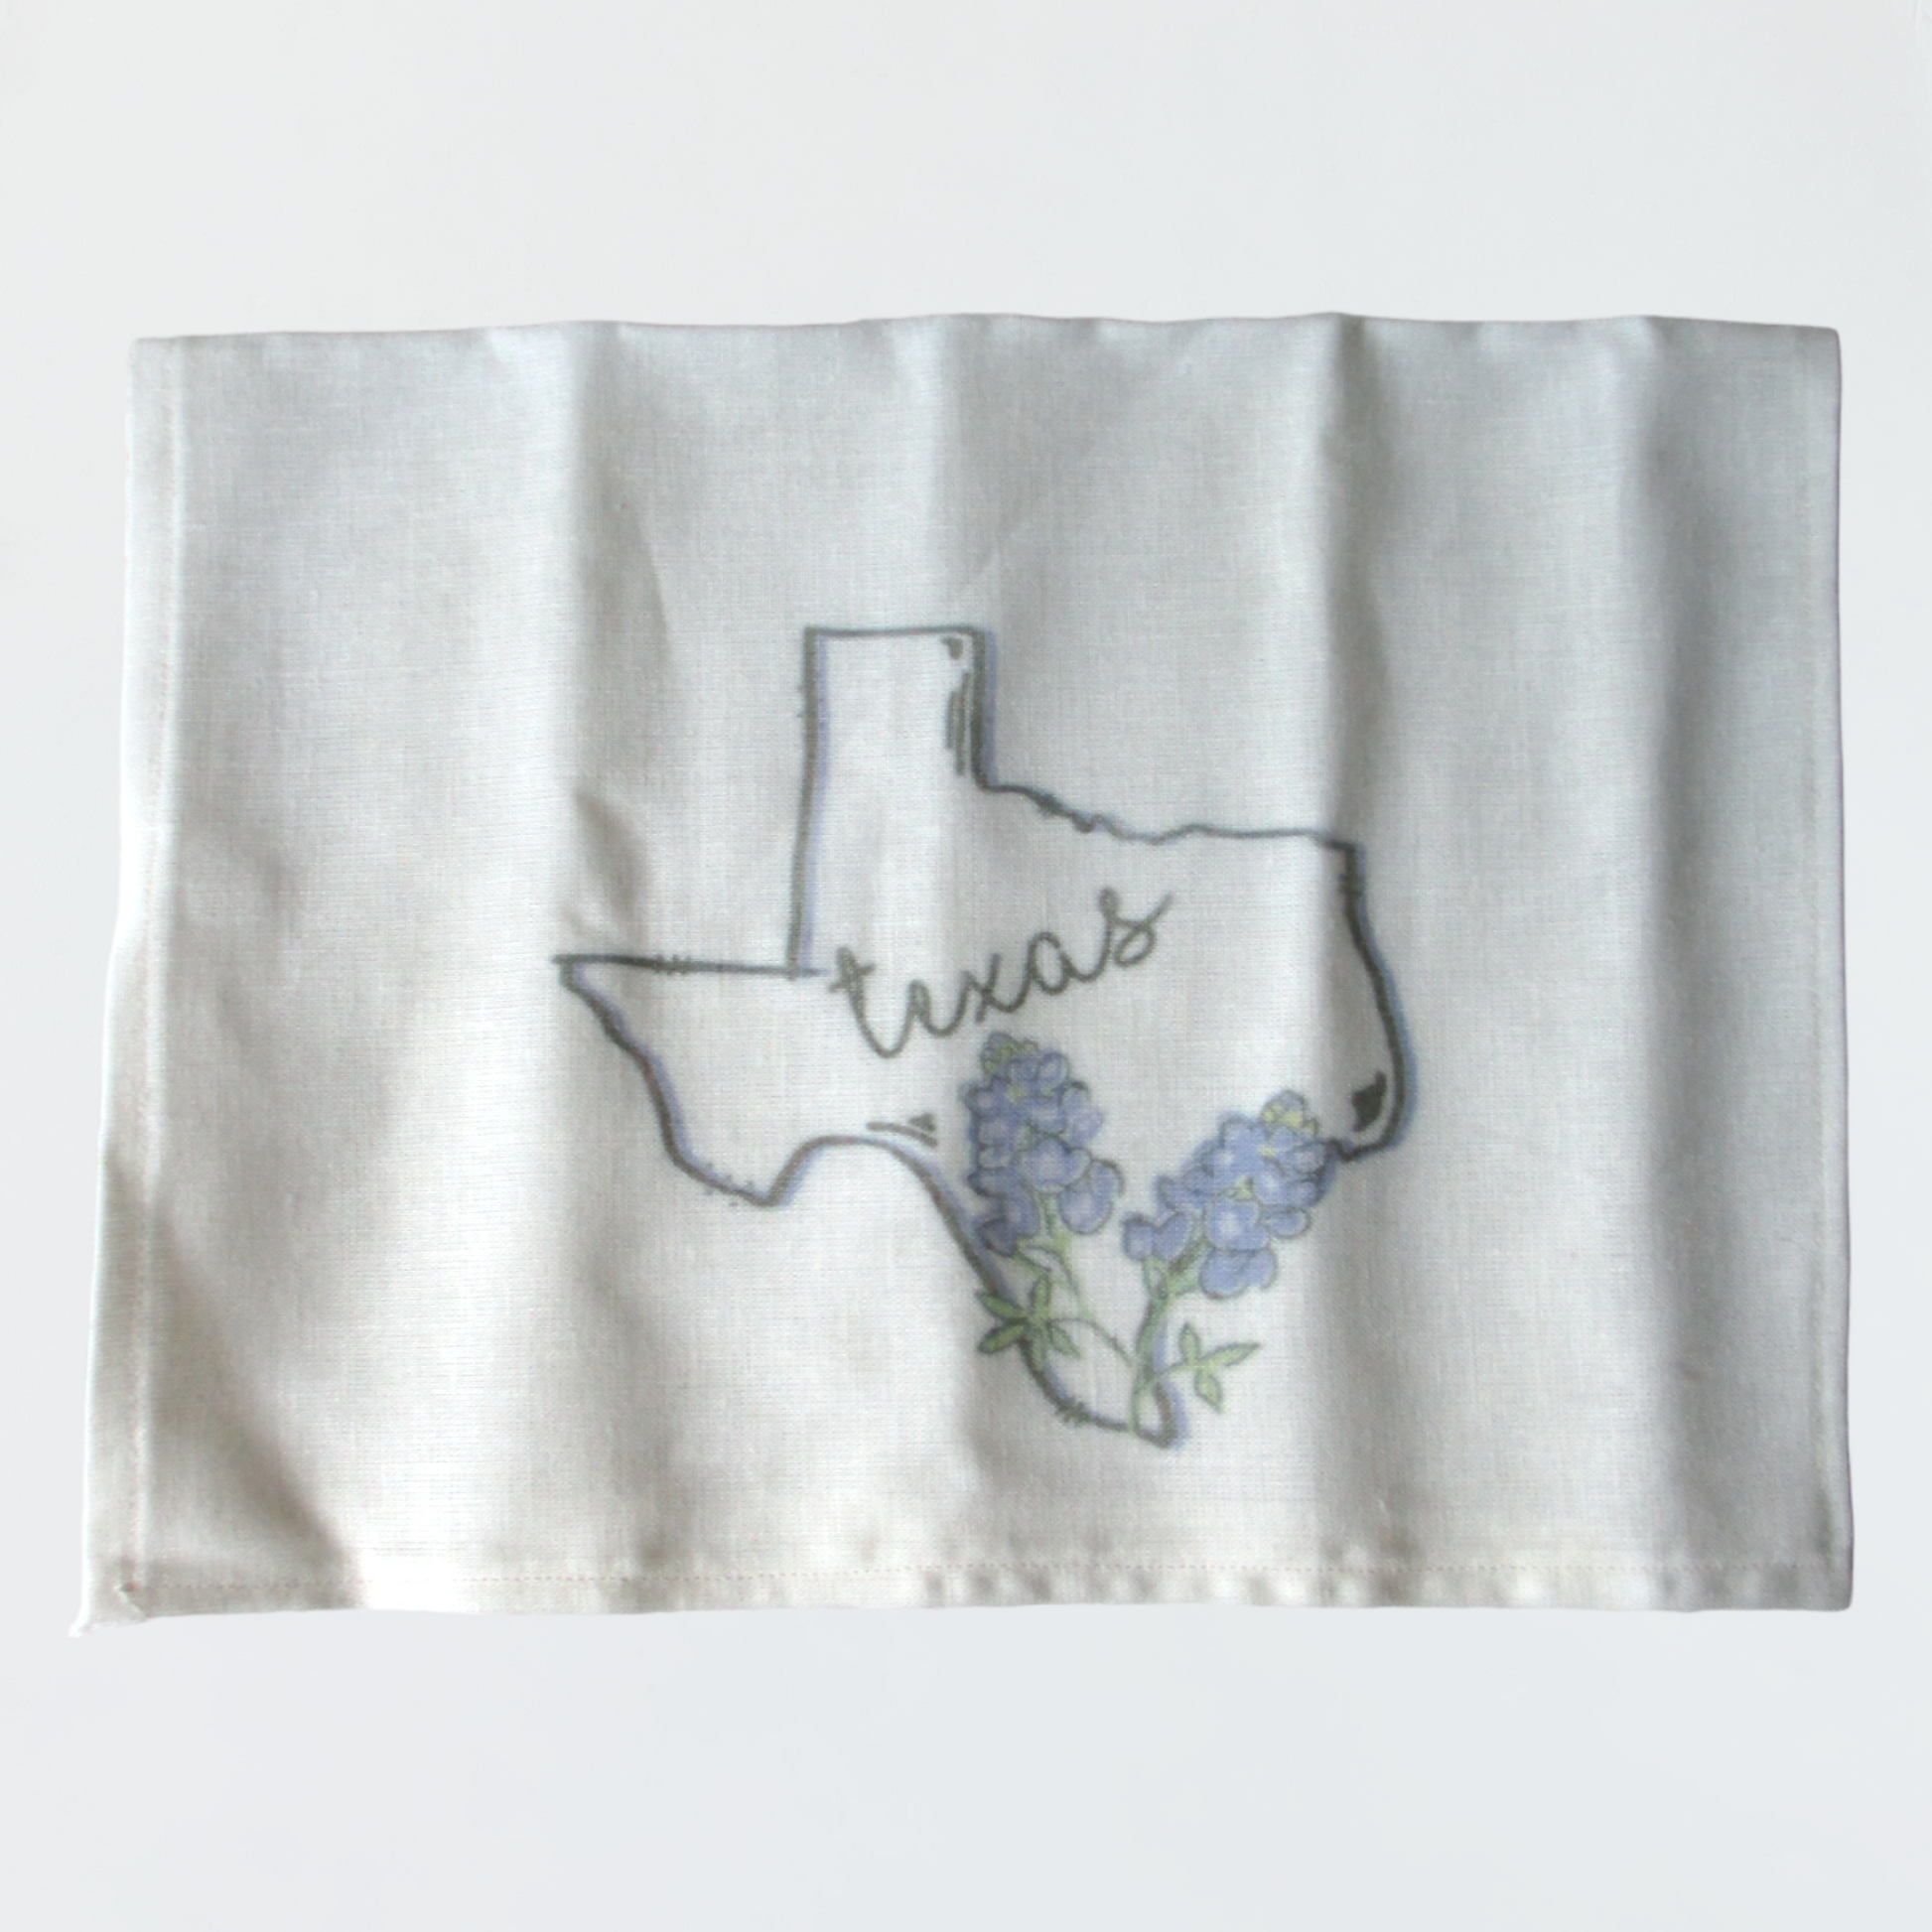 Learn about the mission of Little W Creations Co. There is more than you know.  Check out this beautifully embroidered tea towel and more.  IG:@littlewcreationsco